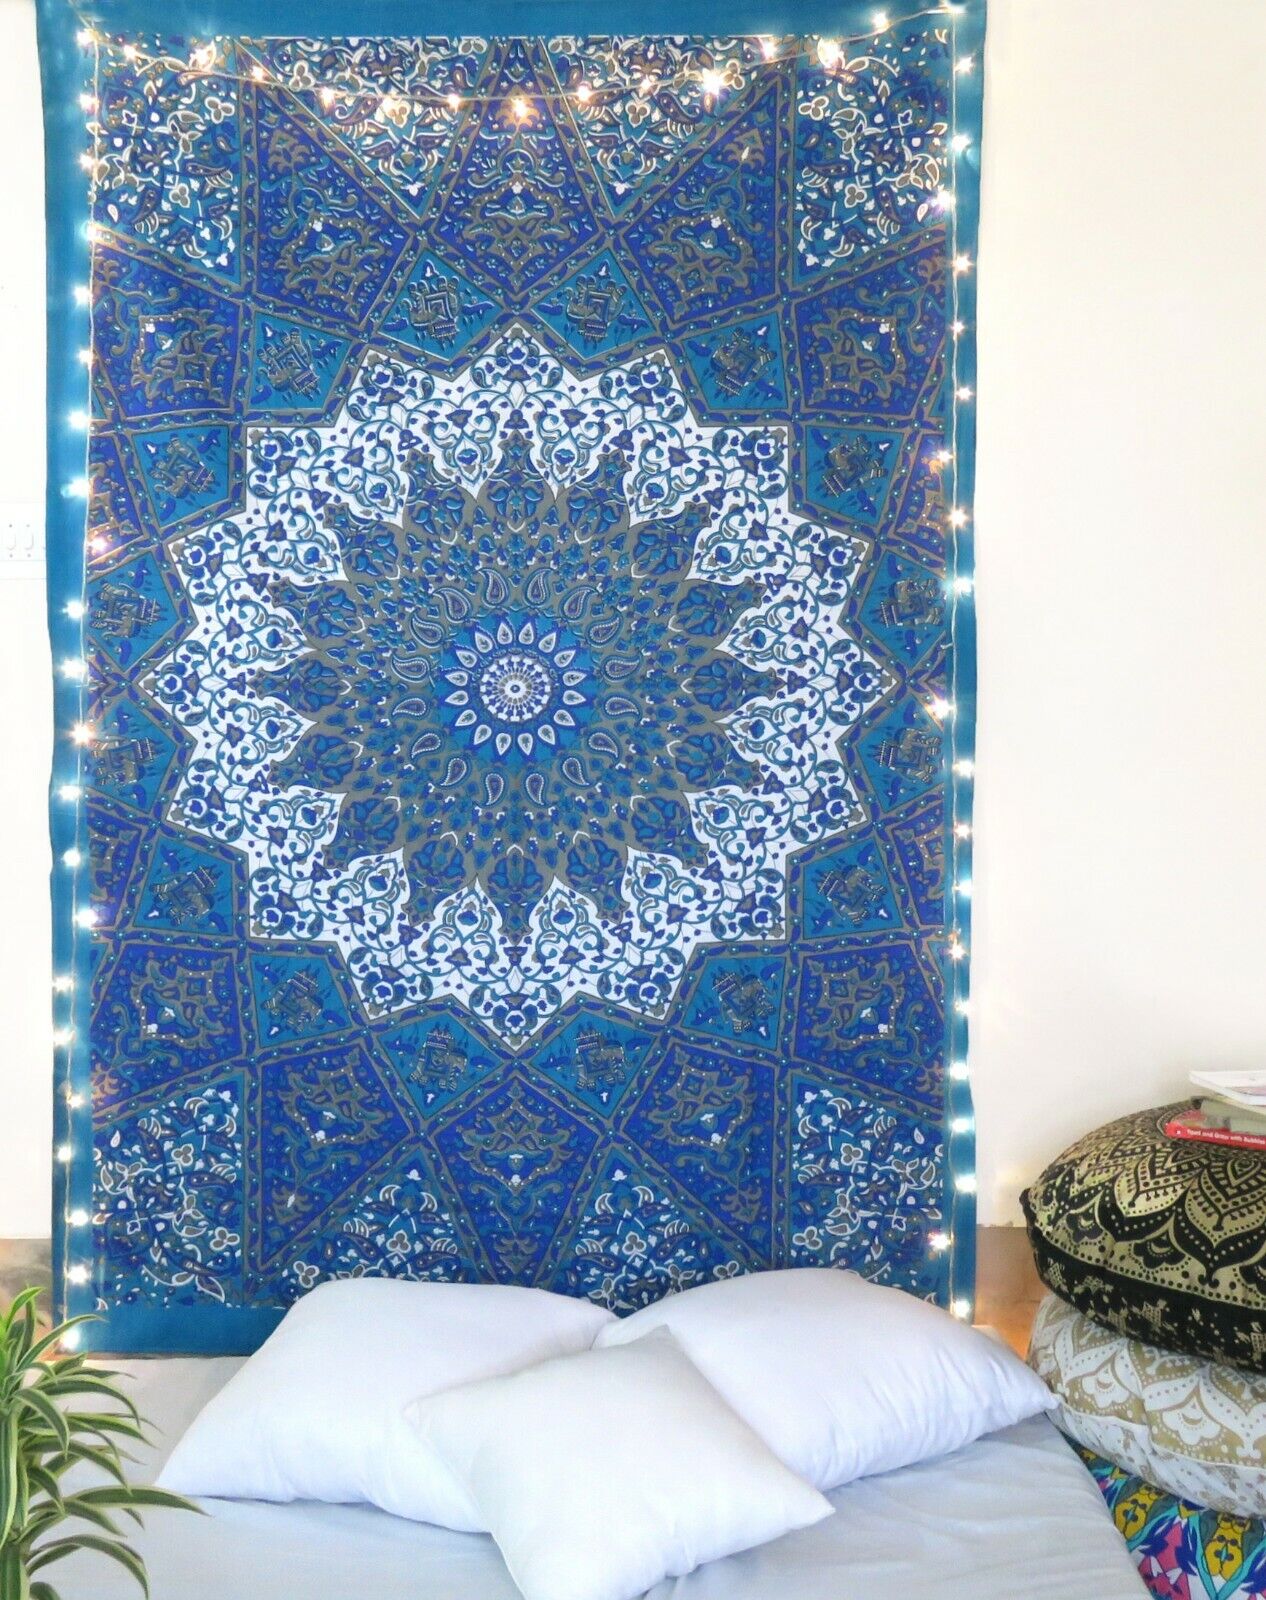 USA Psychedelic Mandala Tapestry Hippie Room Wall Hanging Blanket Art Home Decor